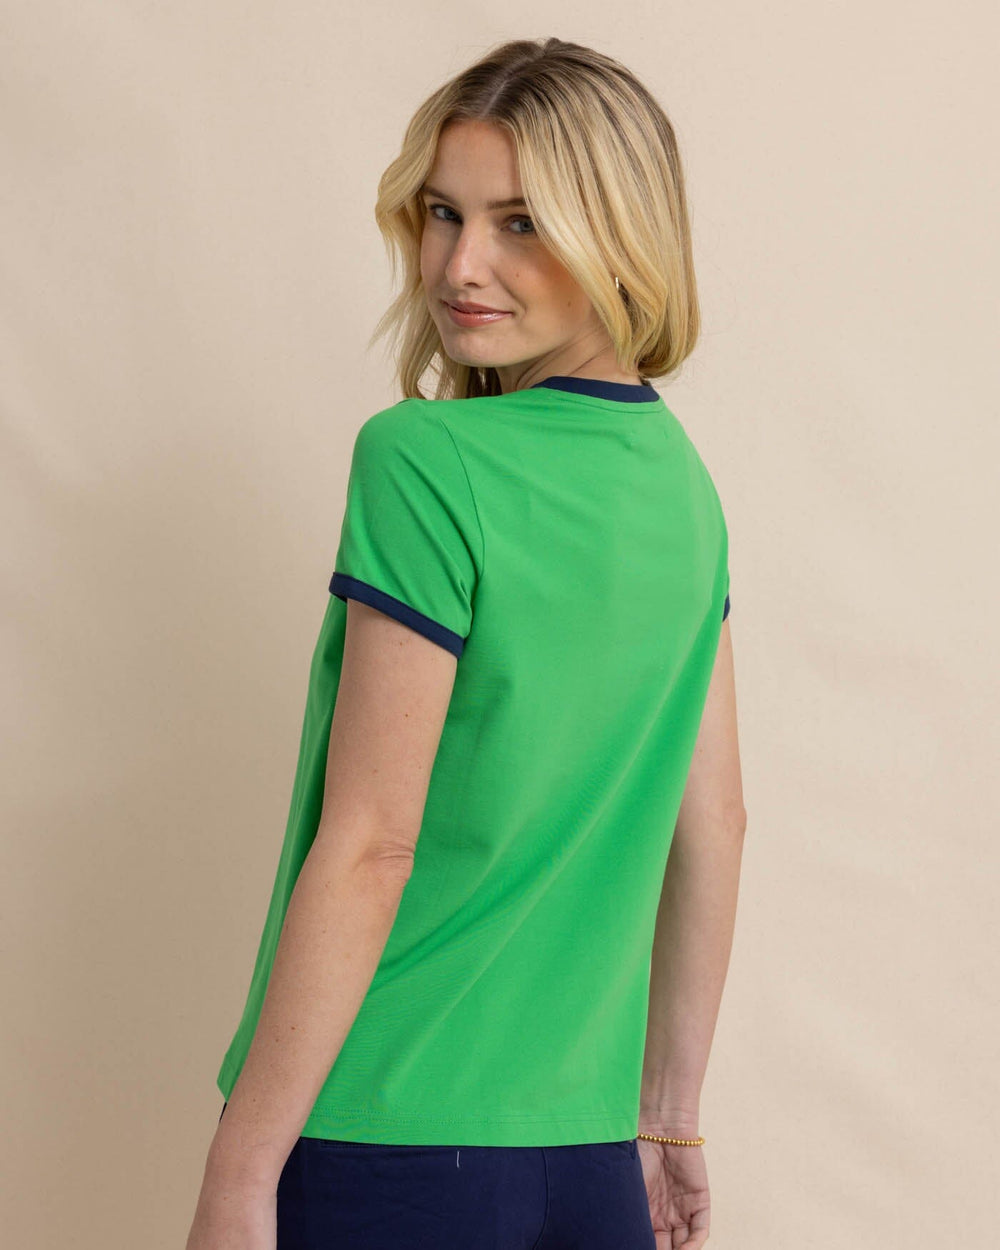 The back view of the Reece Baby Pique Top by Southern Tide - Lawn Green